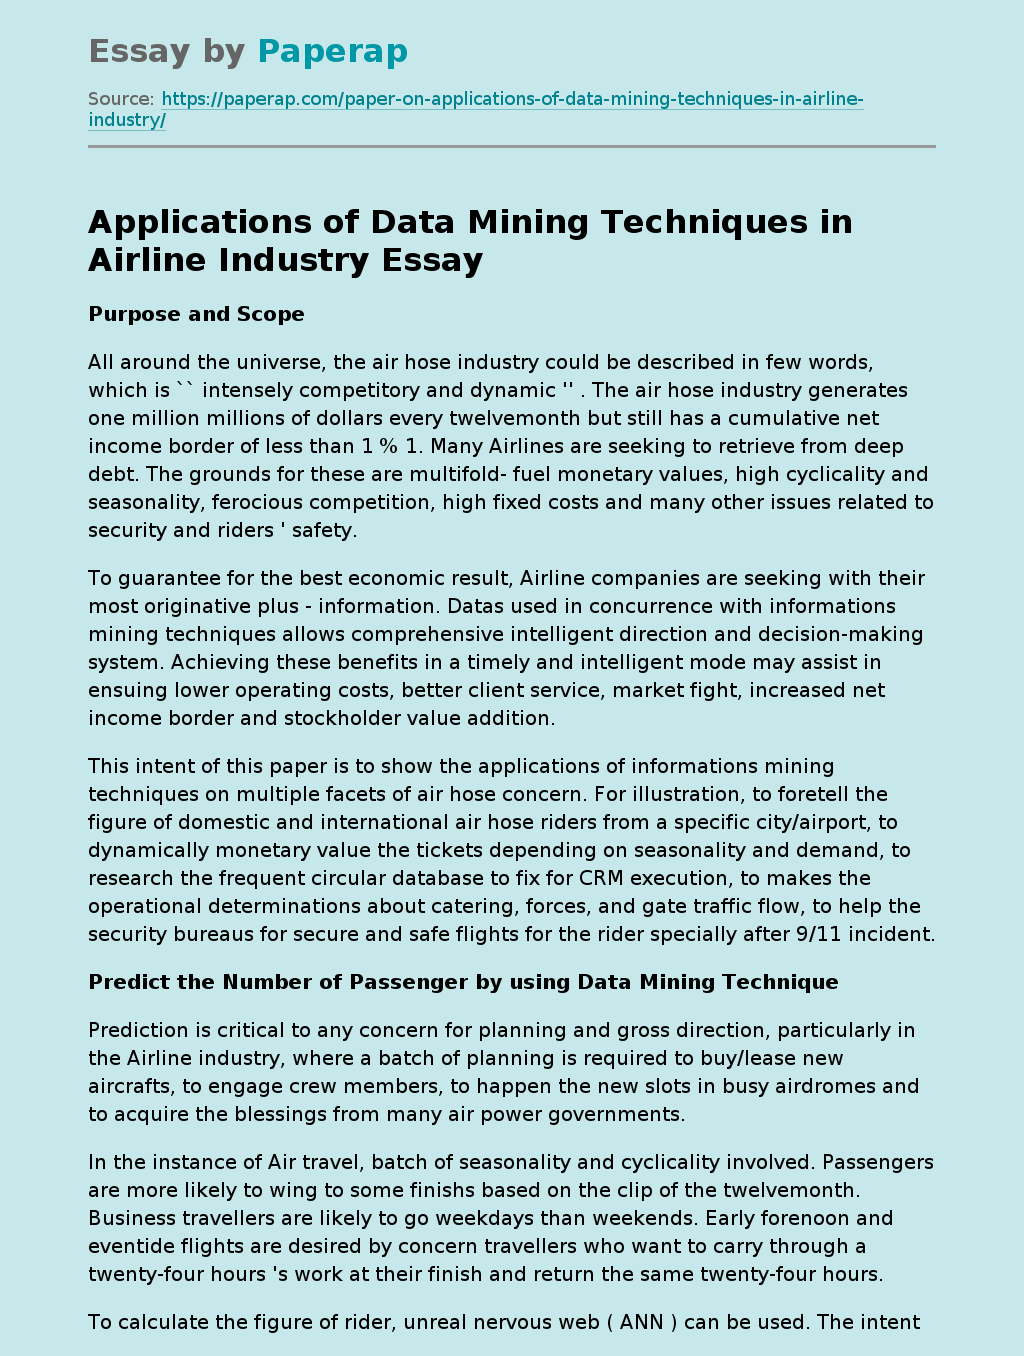 Applications of Data Mining Techniques in Airline Industry